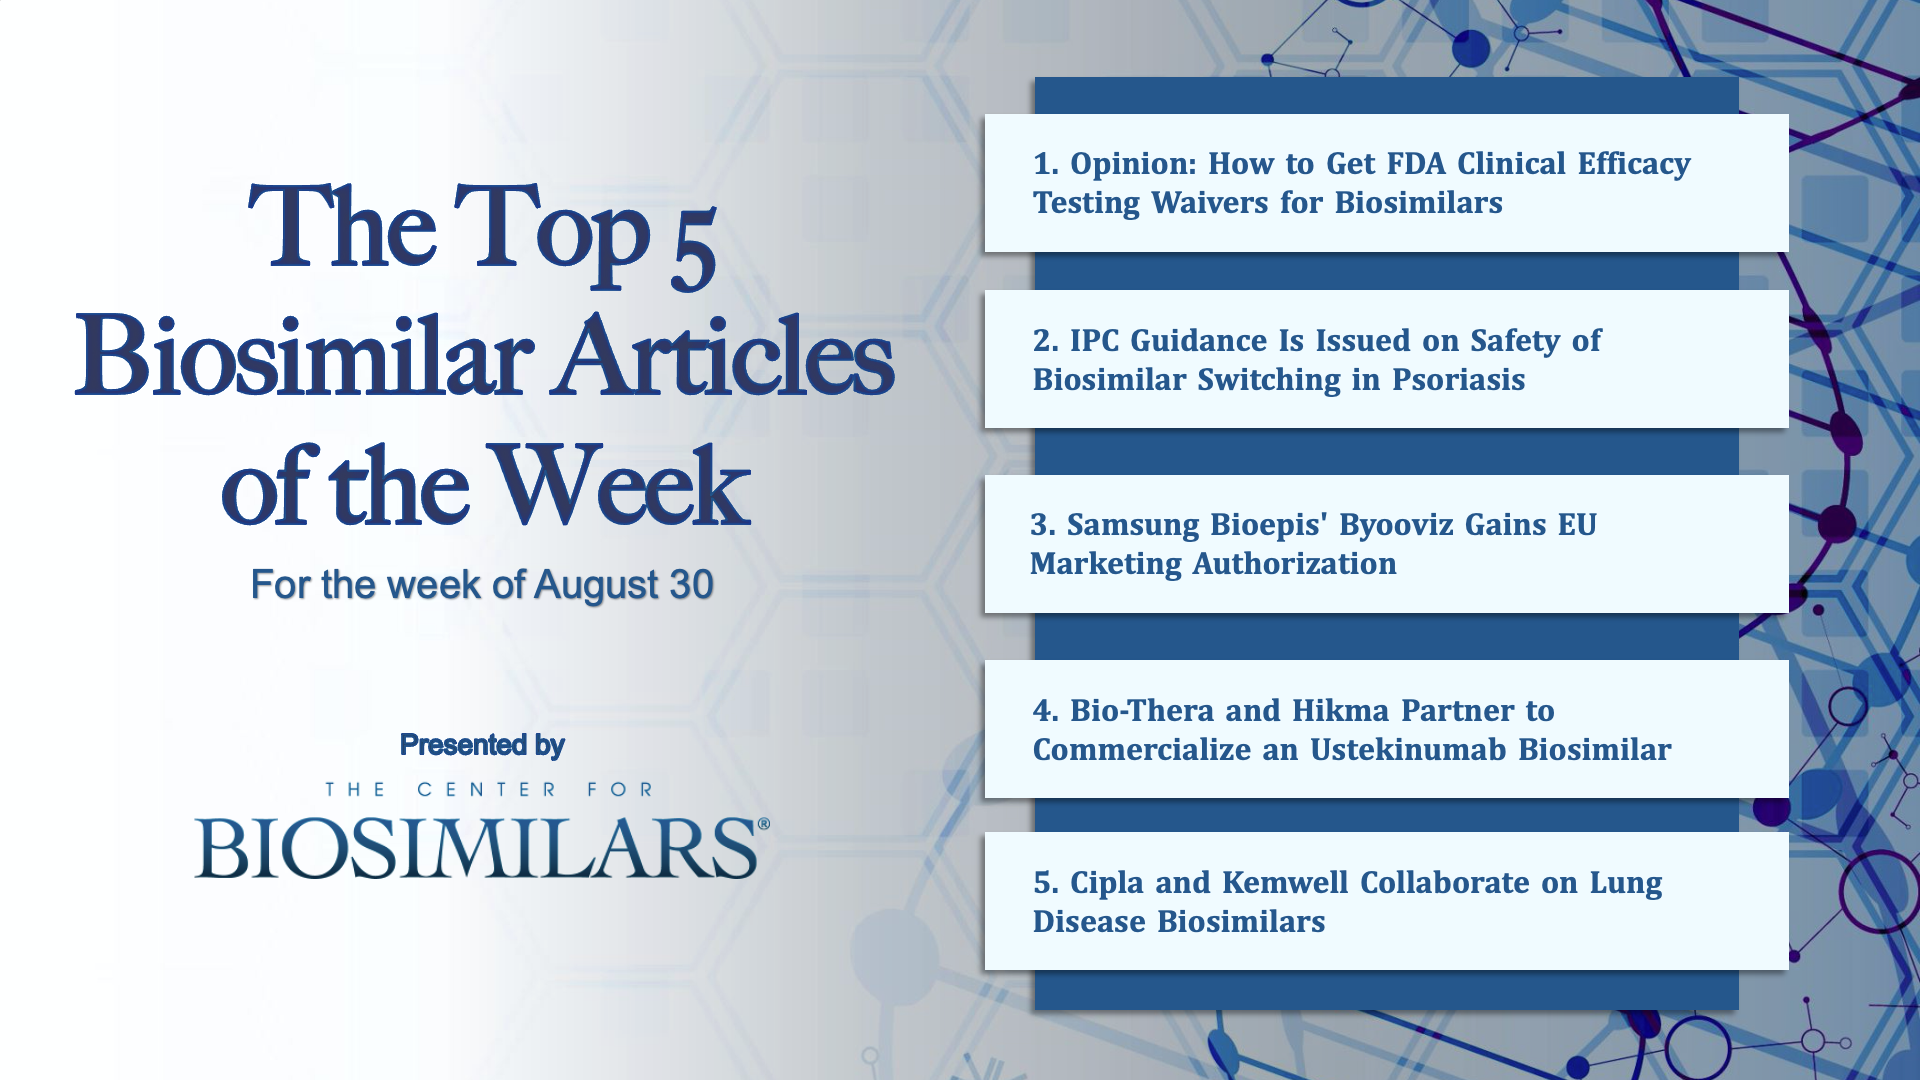 Here are the top 5 biosimilar articles for the week of August 30, 2021.